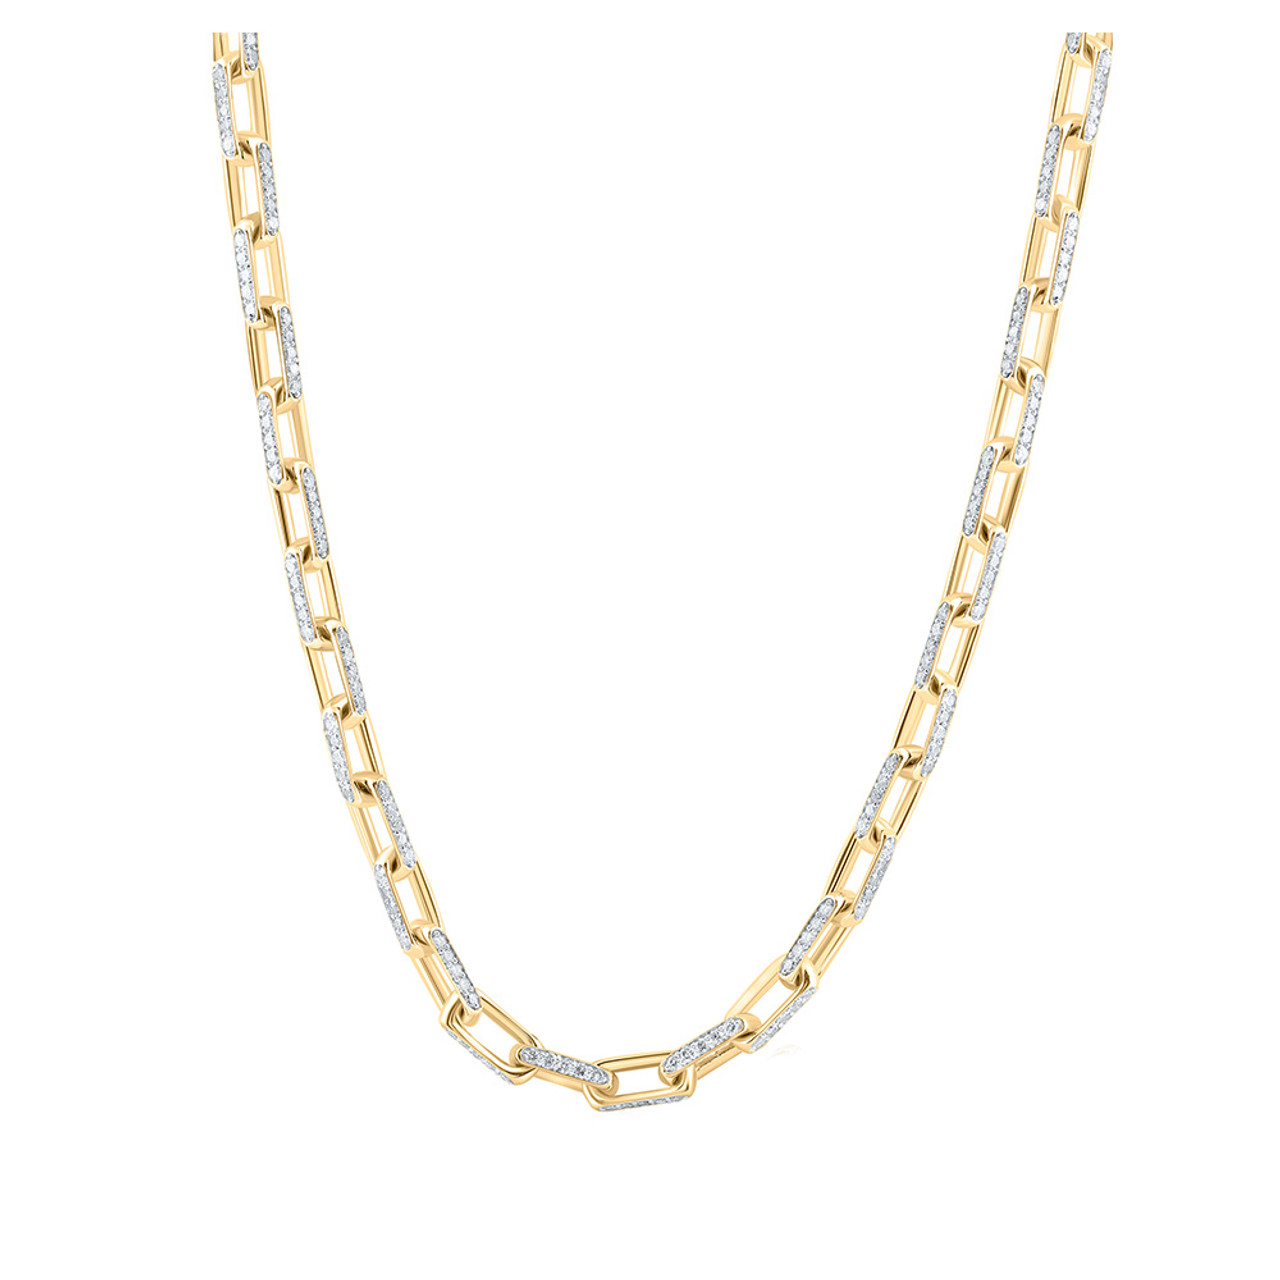 14K Gold Miami Cuban Diamond Chain 22 Inches 10mm 66583: buy online in NYC.  Best price at TRAXNYC.